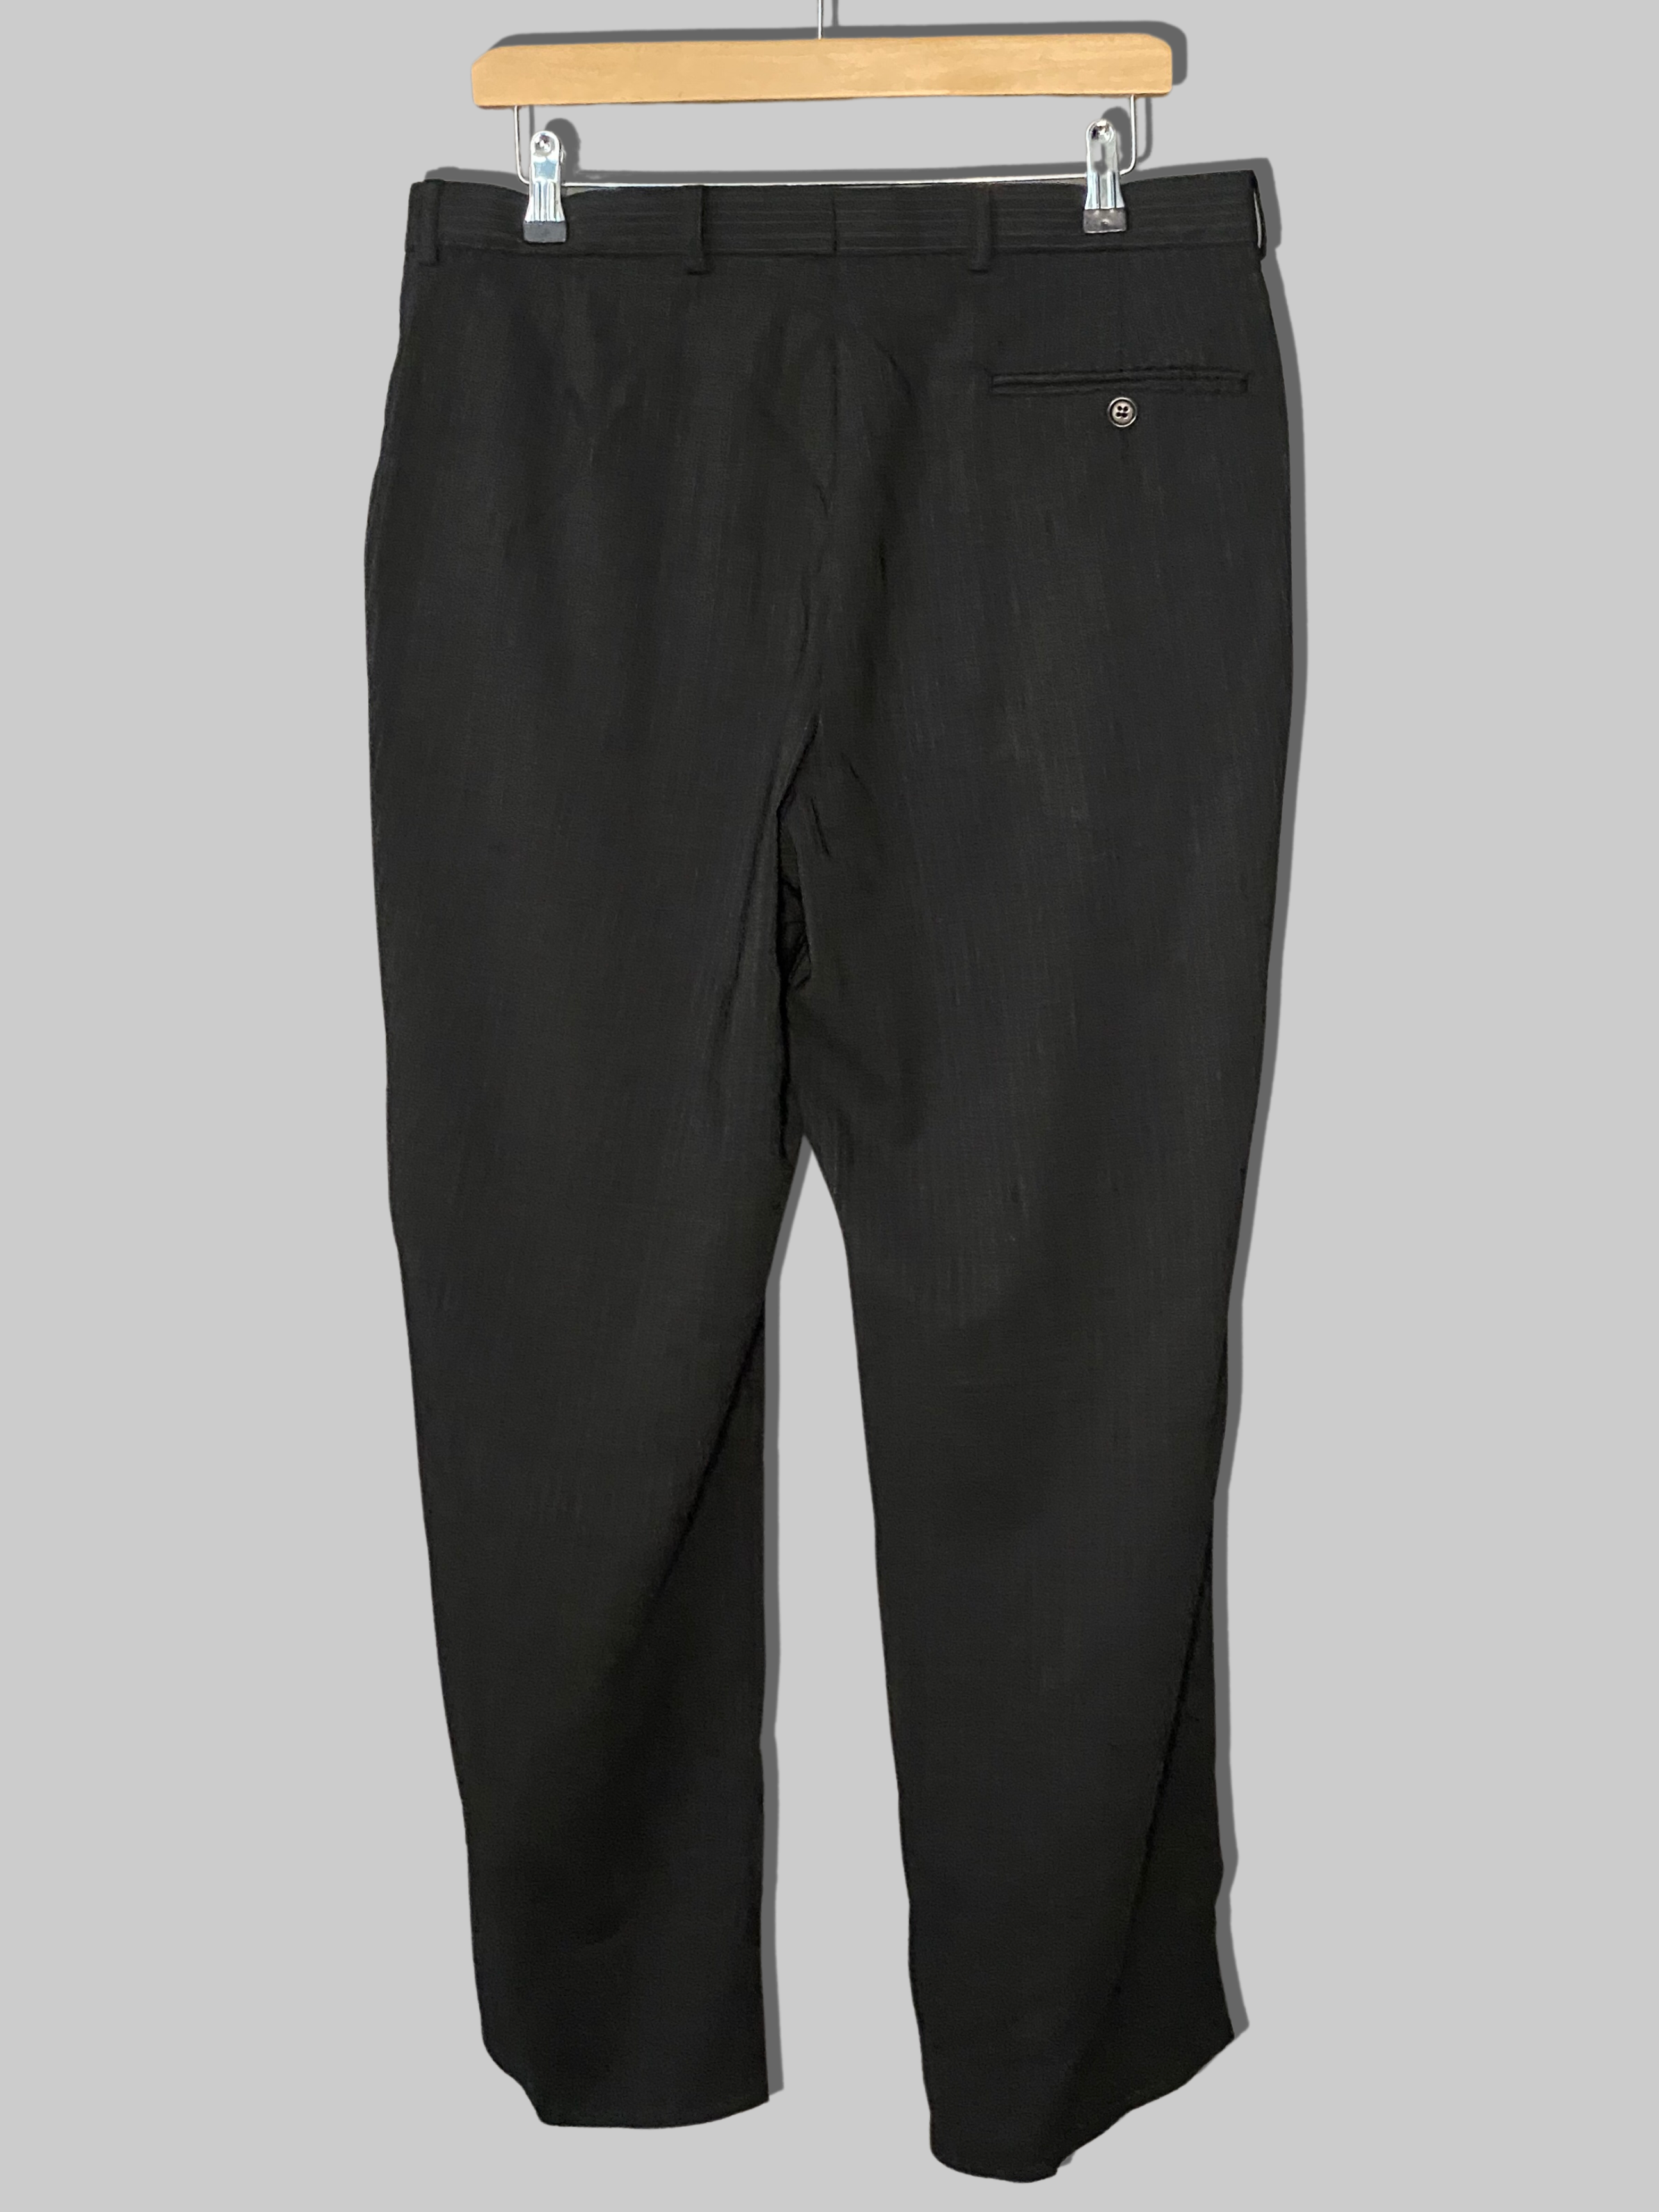 Vintage Pinstripe Trousers - Charcoal